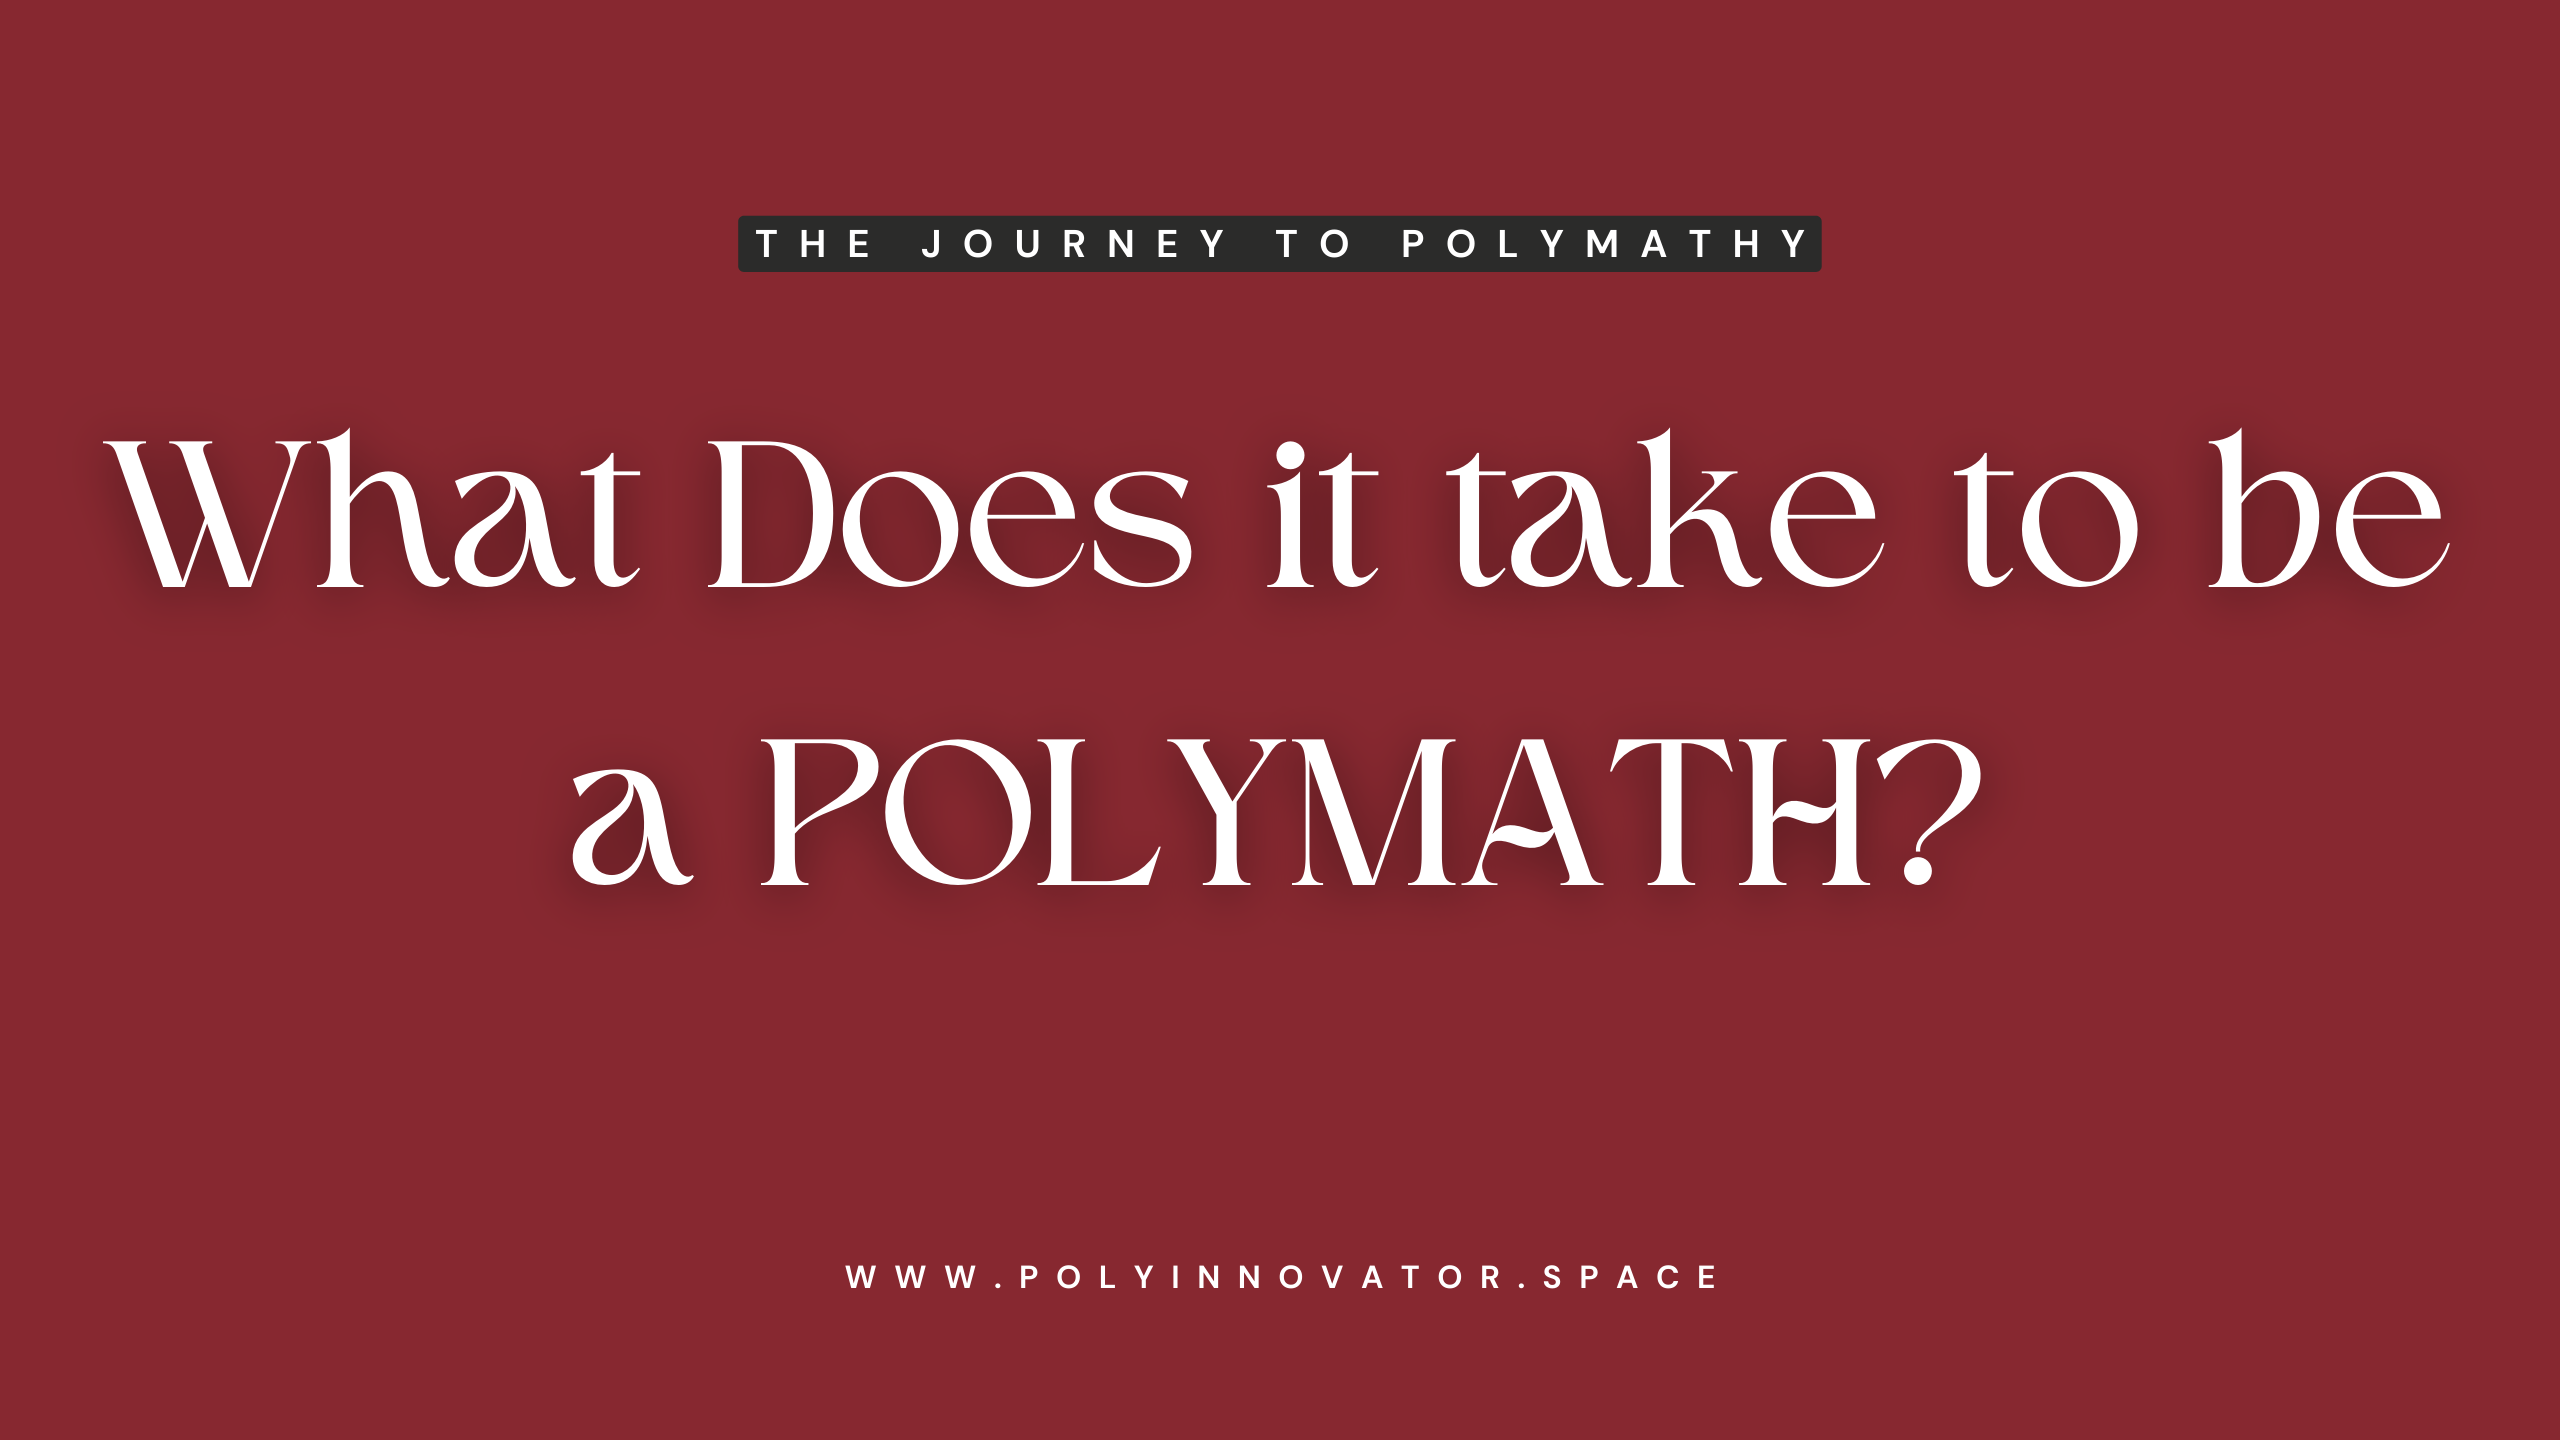 What Does it take to be a POLYMATH?